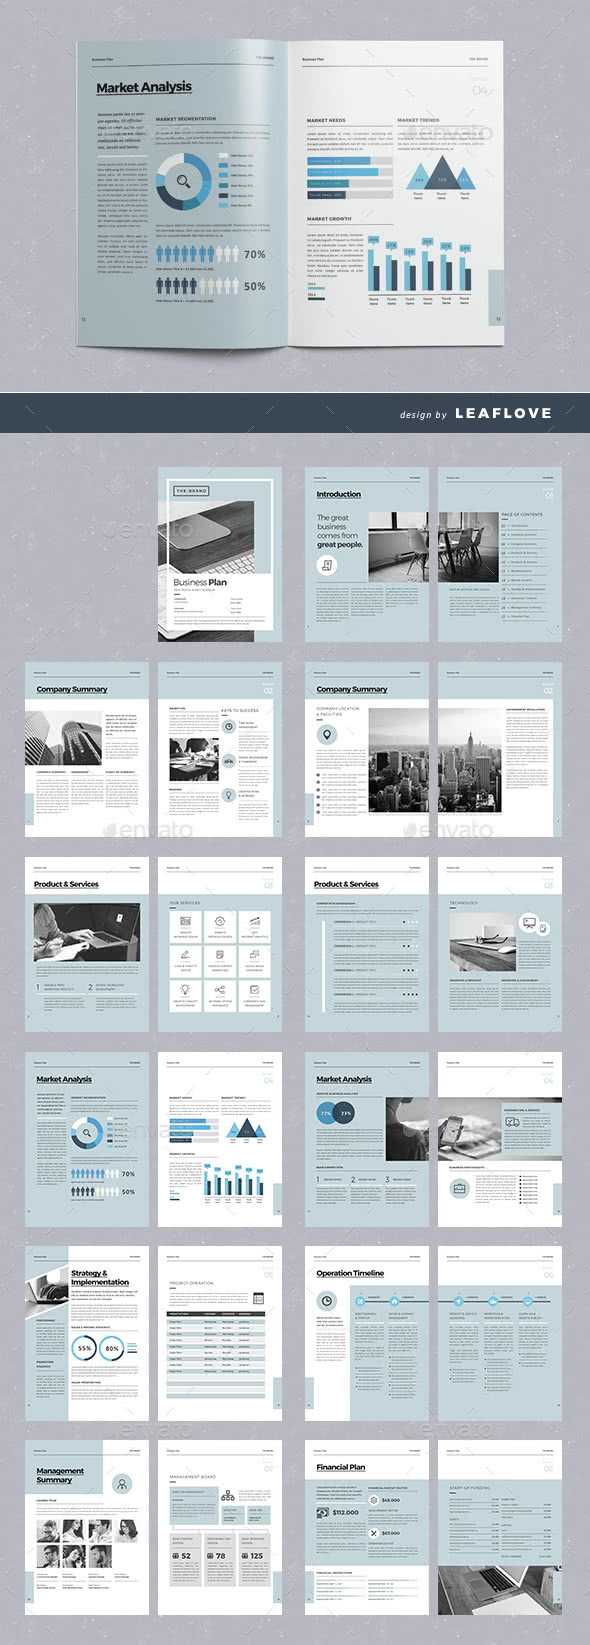 75 Fresh Indesign Templates And Where To Find More With Free Indesign Report Templates